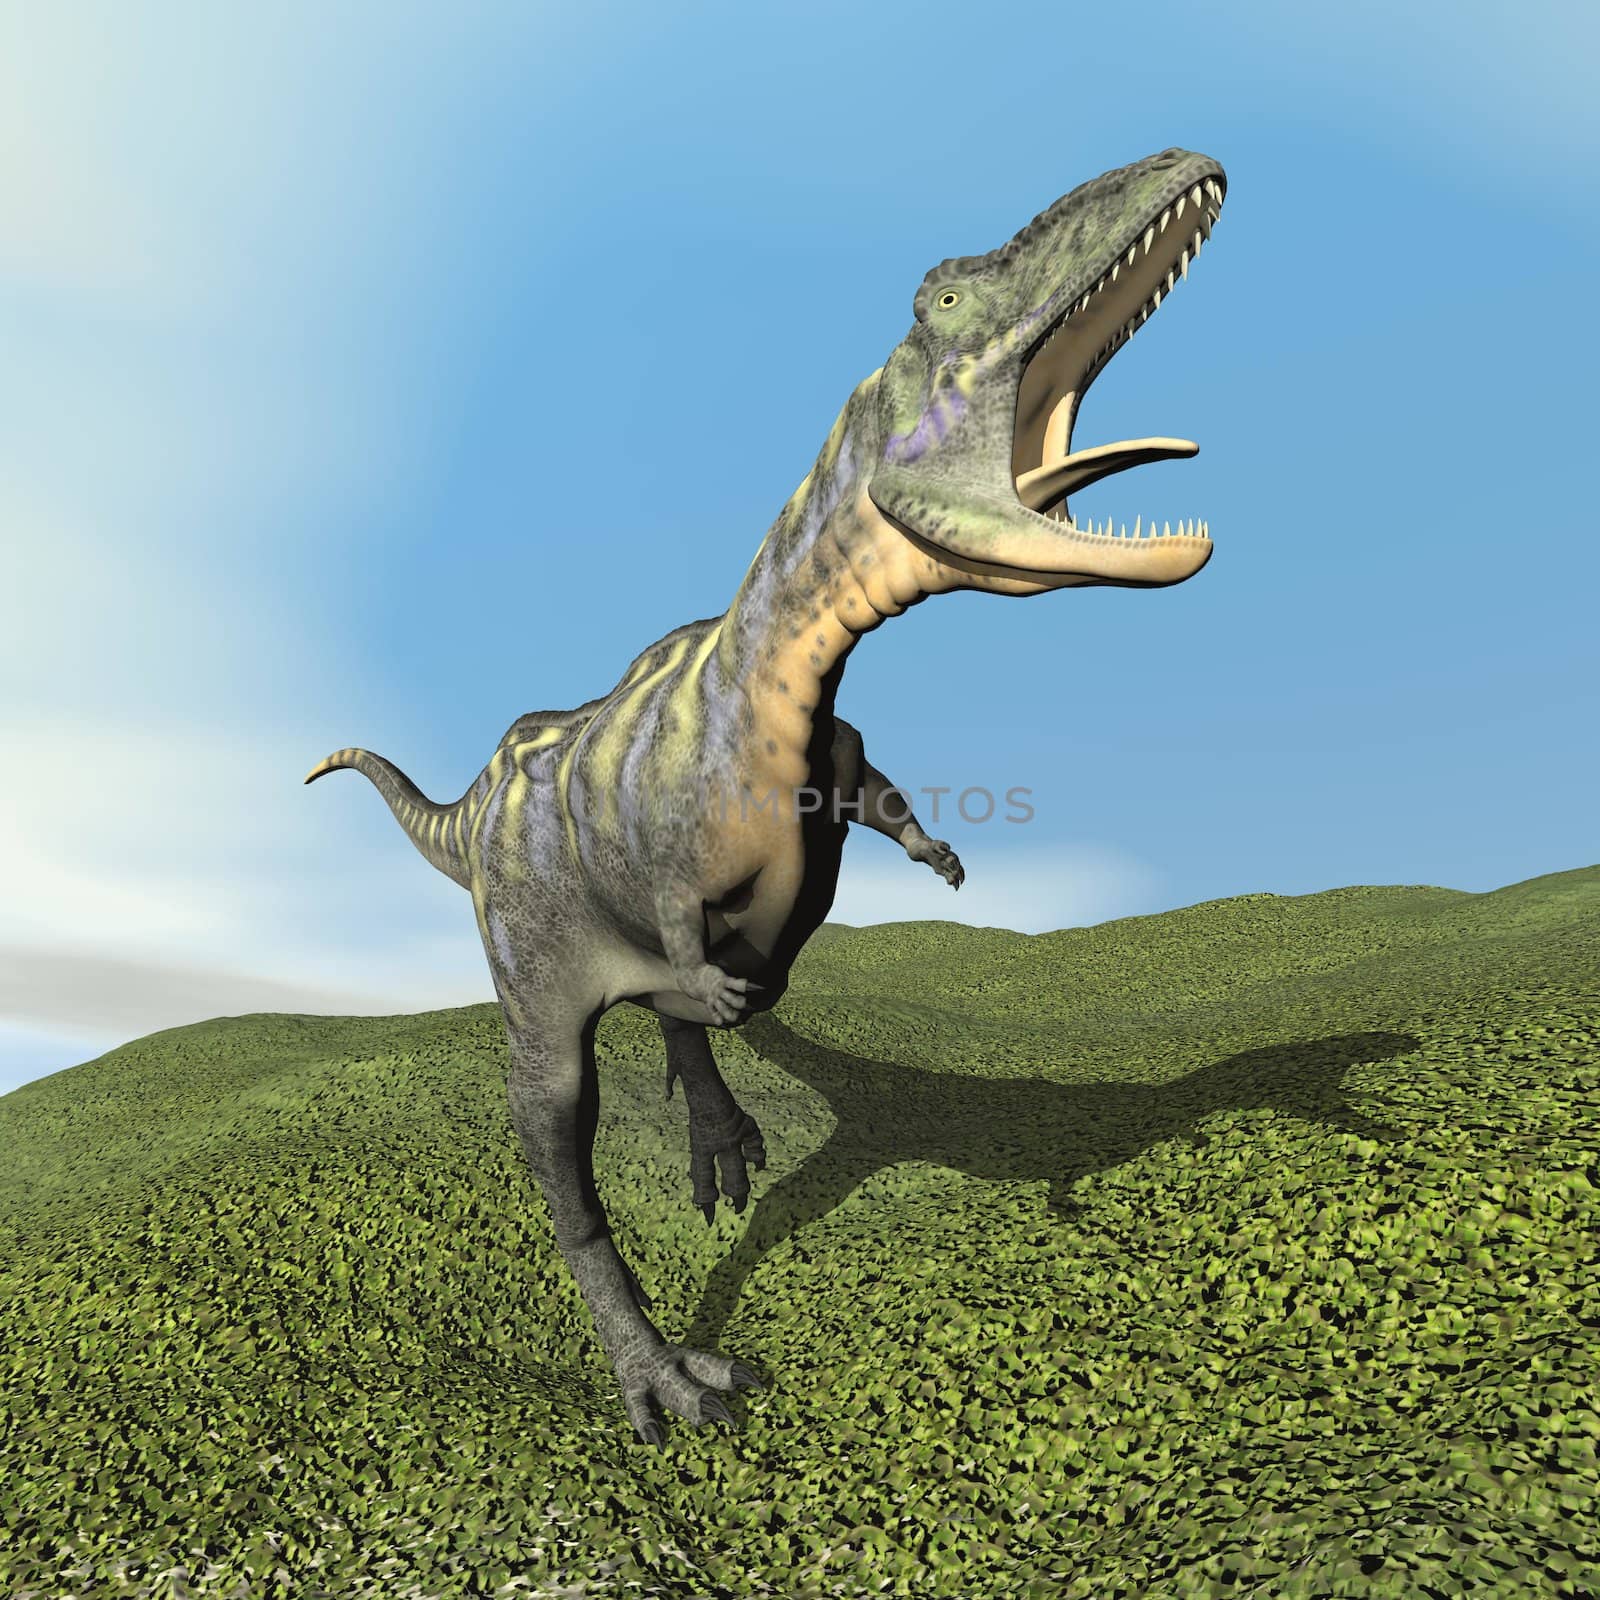 Aucasaurus dinosaur roaring while walking on the grass by day - 3D render